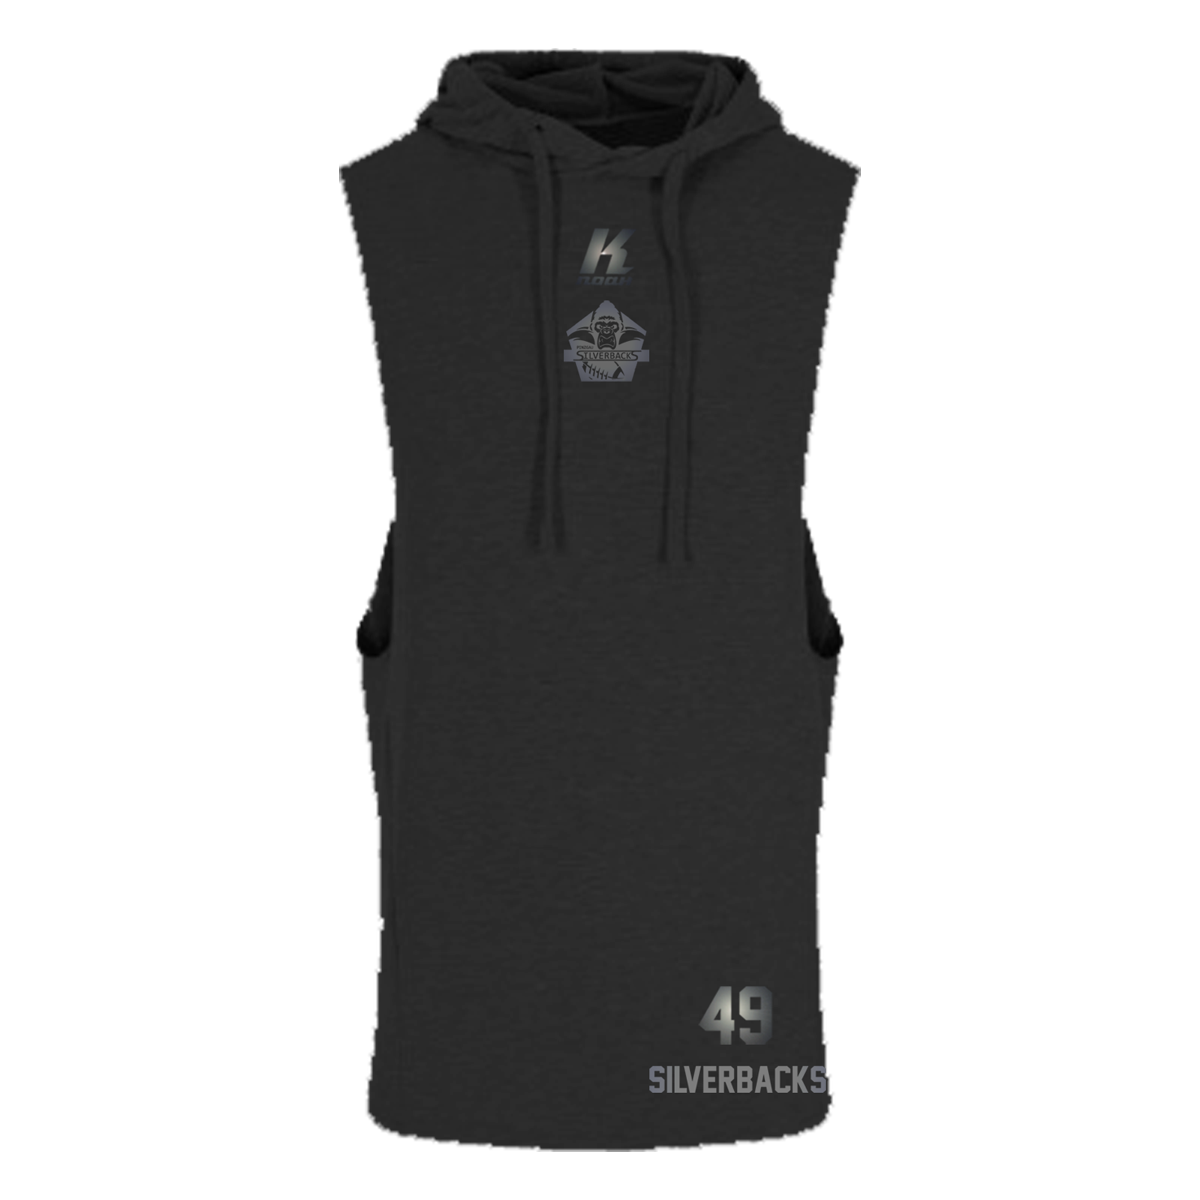 Silverbacks "Blackline" Sleeveless Muscle Hoodie JC053 with Playernumber or Initials